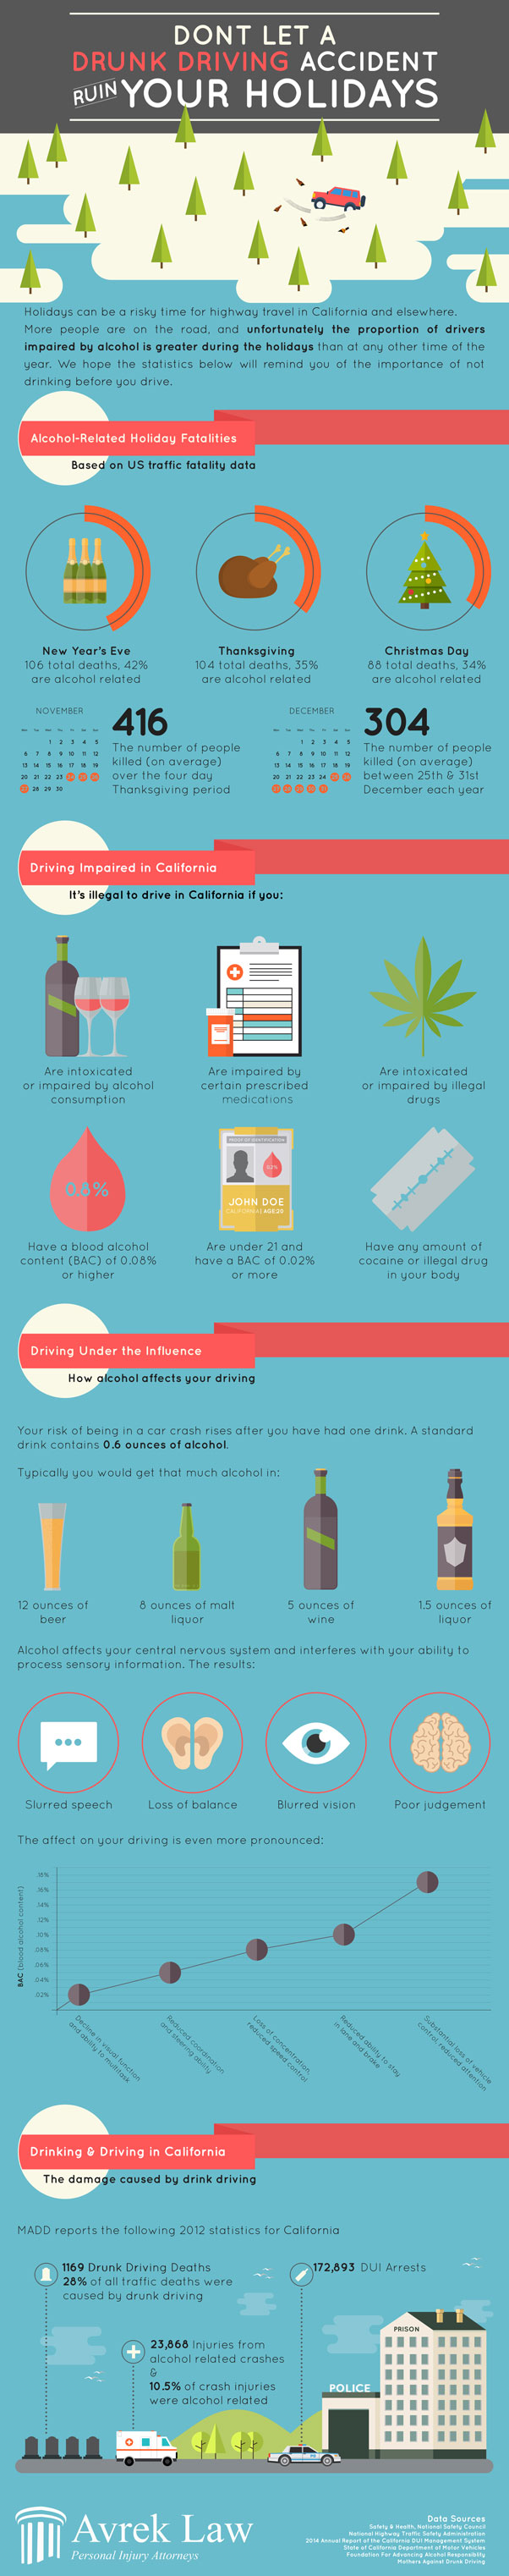 Avrek-Law-Firm-Drunk-Driving-Holidays-Infographic-2014